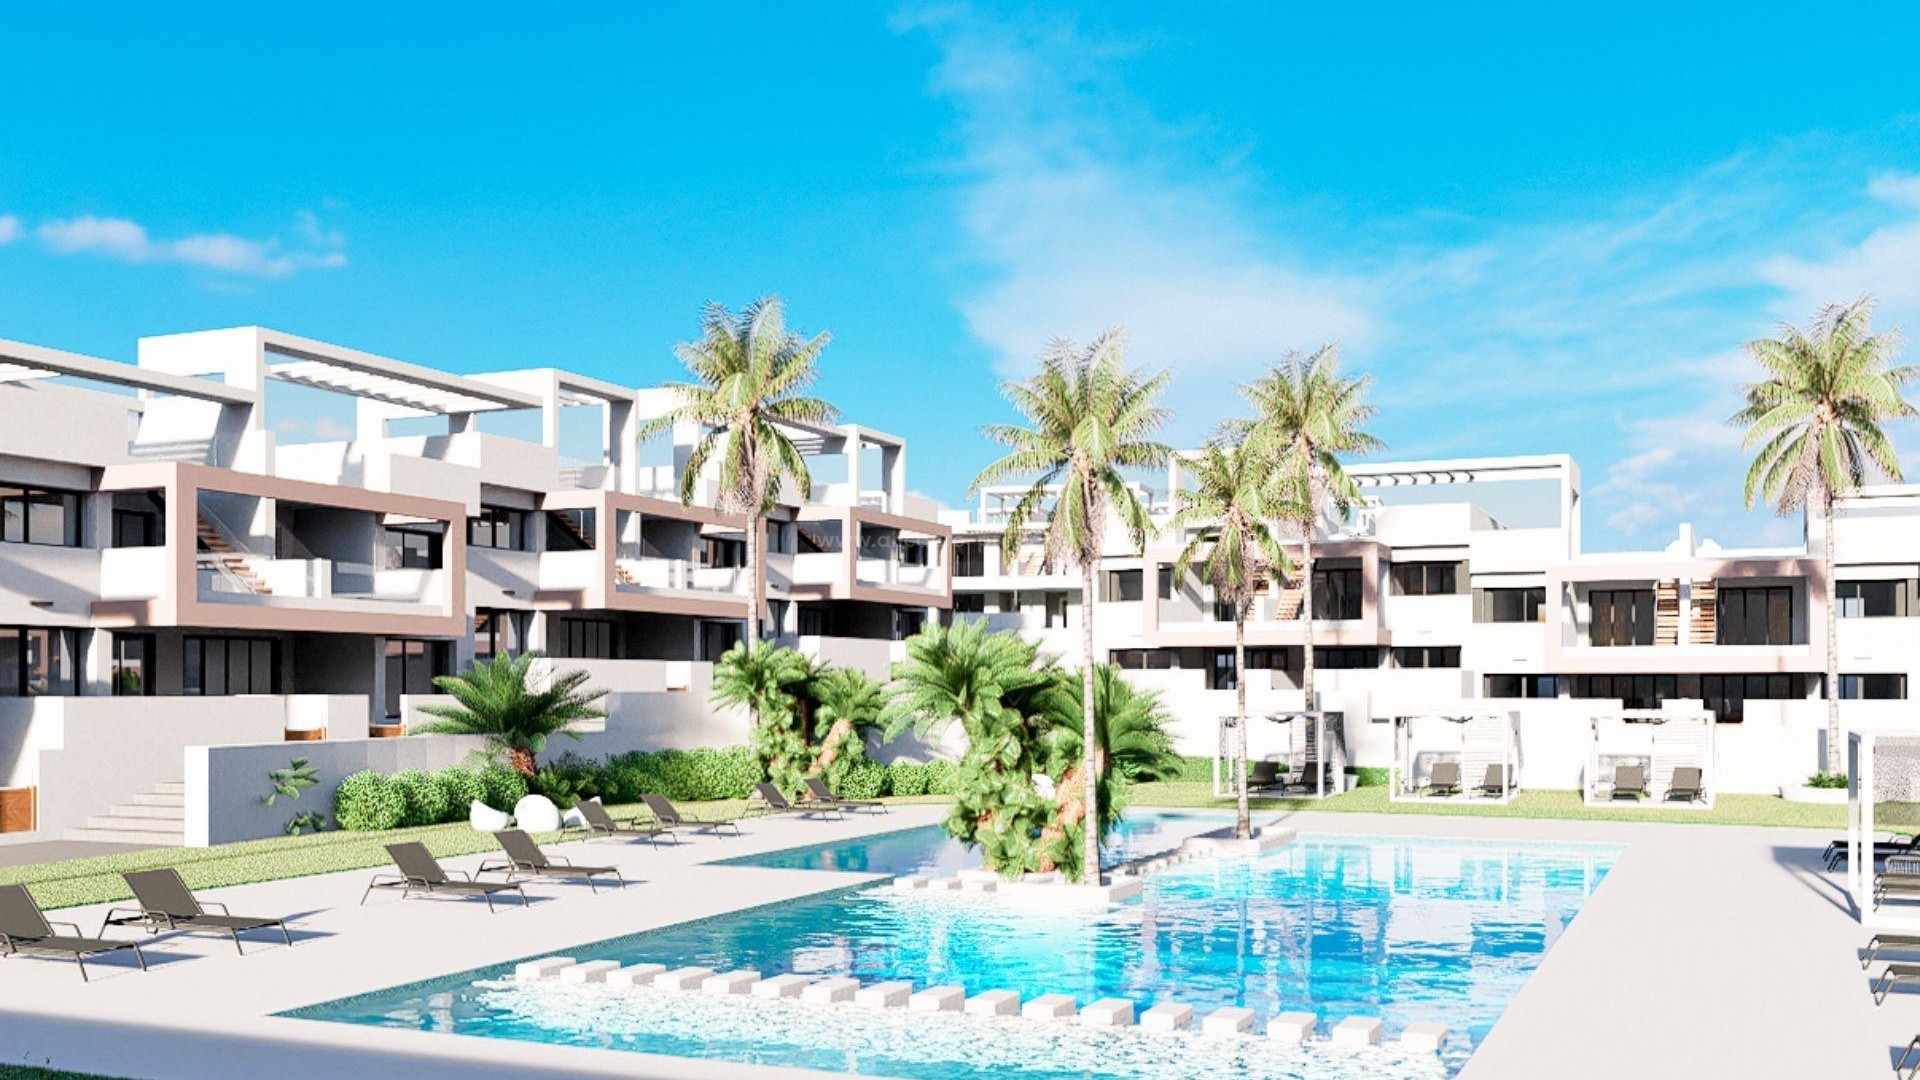 Residential complex in Finestrat, Alicante province, 2/3 bedrooms, 2 bathrooms, some apartments with fantastic views and some with pools, There are common areas